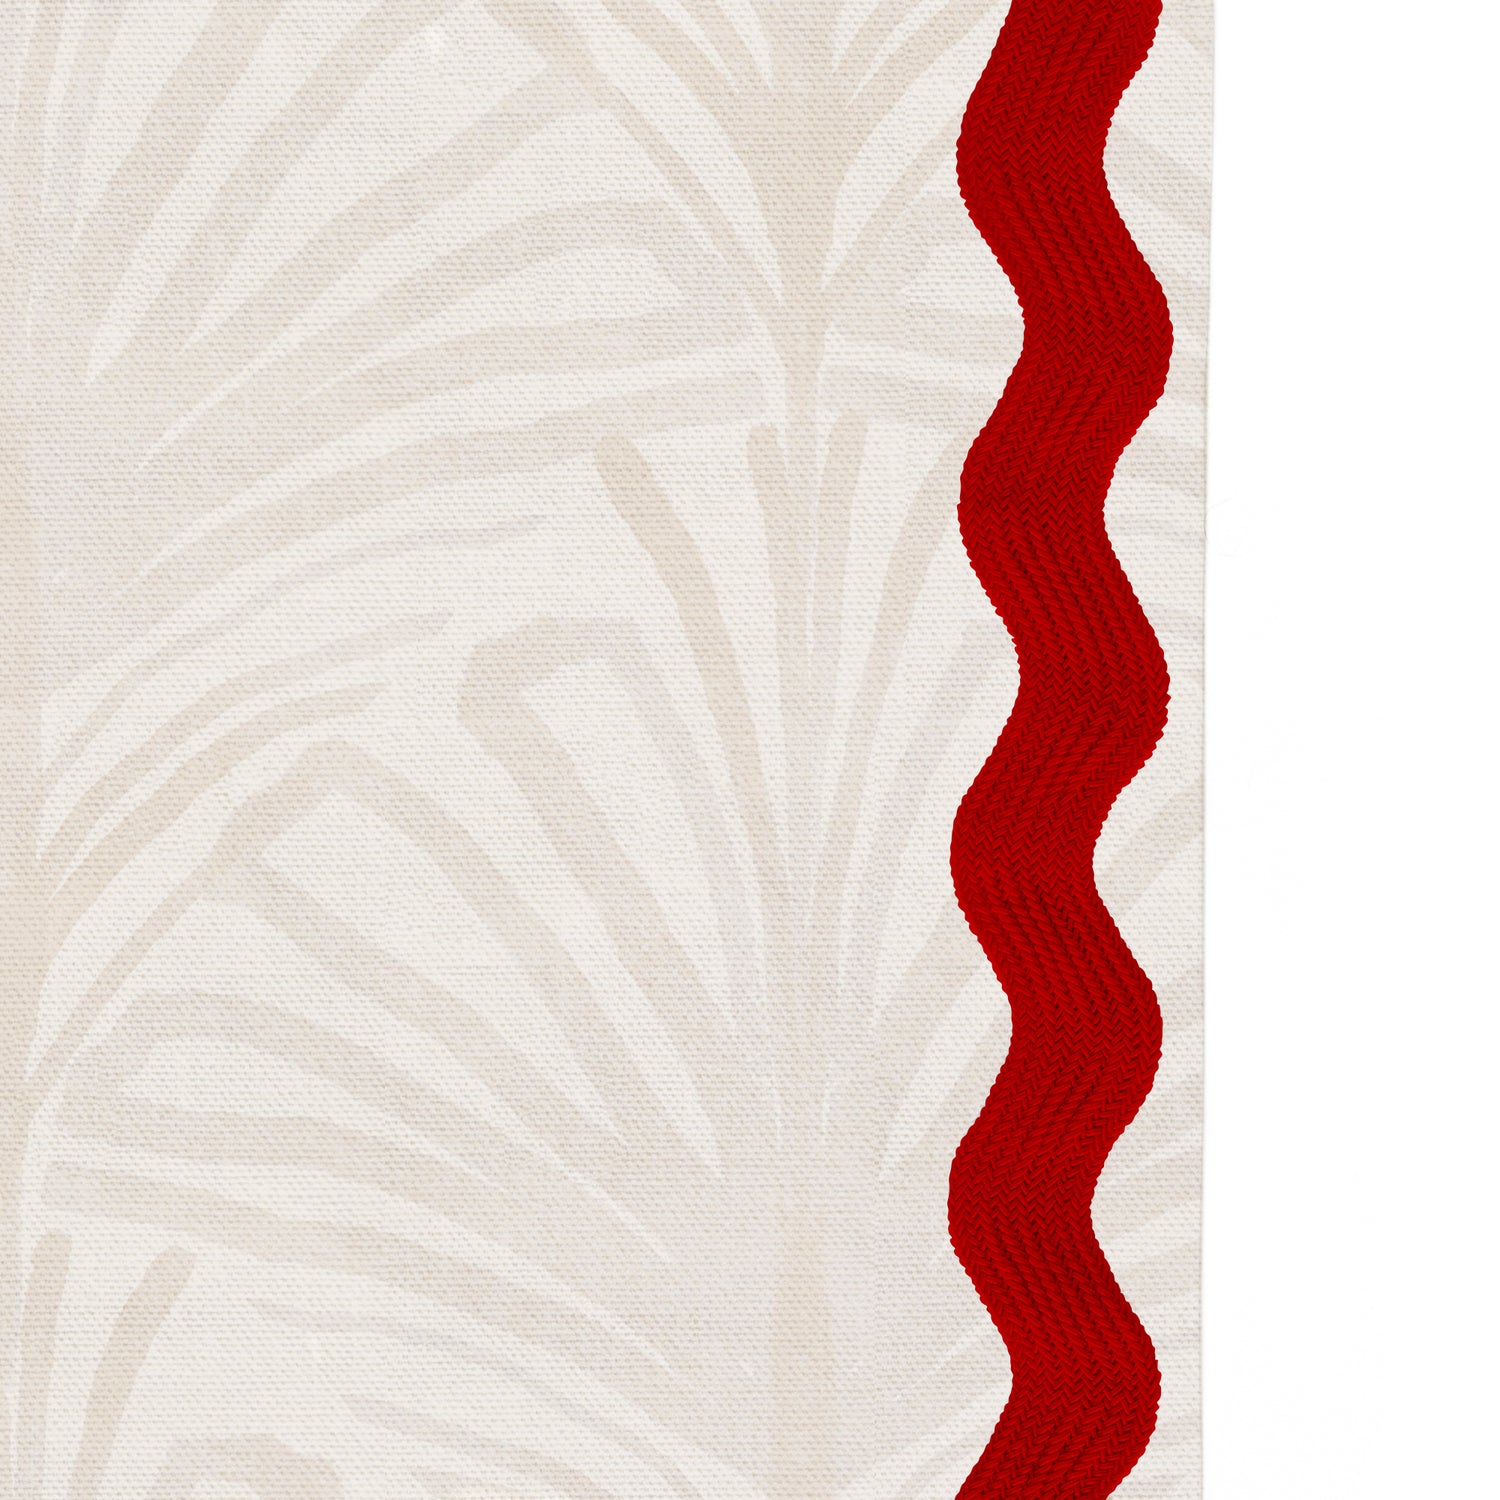 Upclose picture of Suzy Sand custom shower curtain with cherry rick rack trim